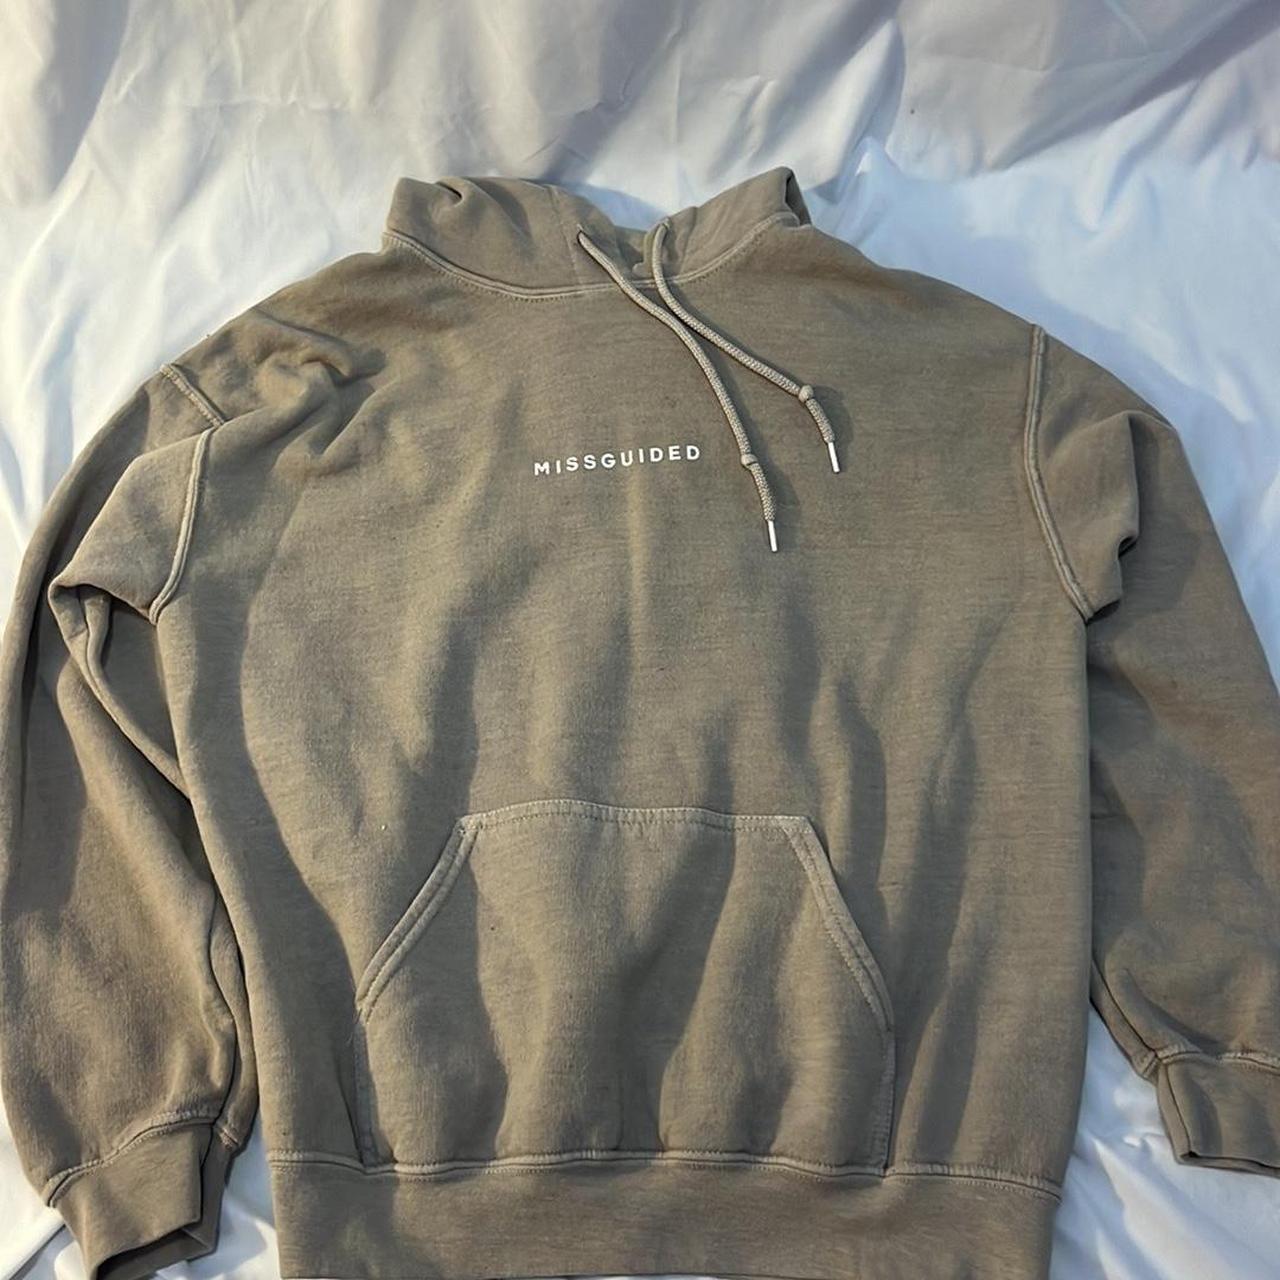 missguided hoodie tan color size small - Depop